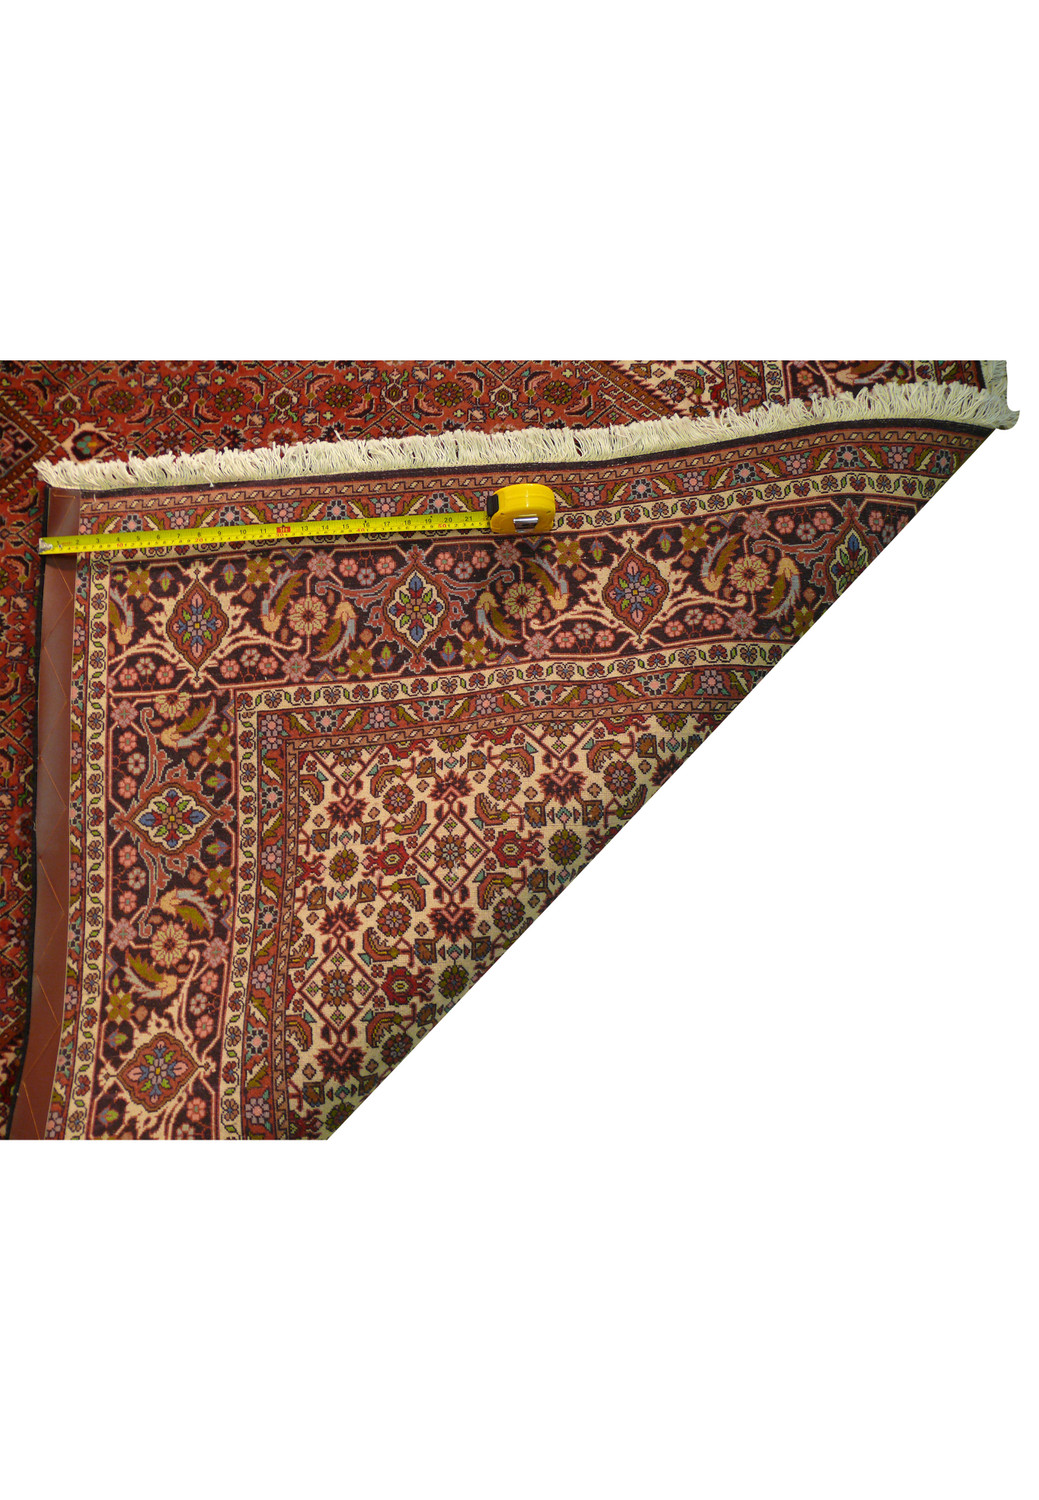 The backside of the Persian Bijar Iron Rug, showing the fine craftsmanship with the patterns faintly visible, indicative of the rug's dense knotting and quality weave.